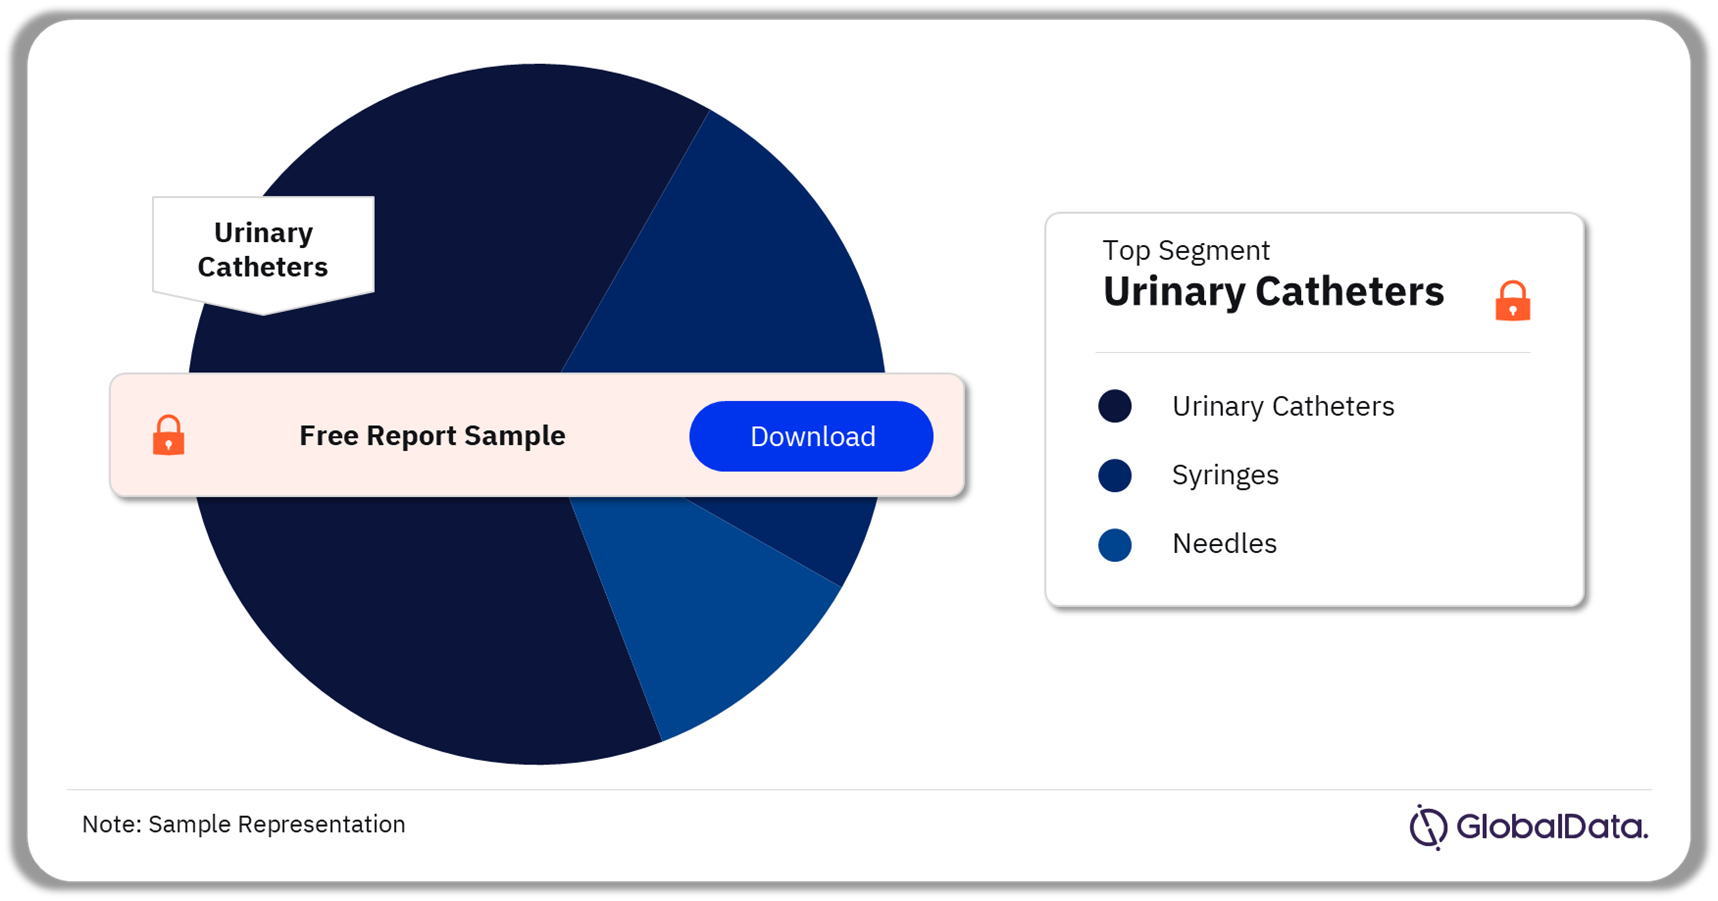 Syringes, Needles, and Urinary Catheters Market Analysis by Segments, 2023 (%)